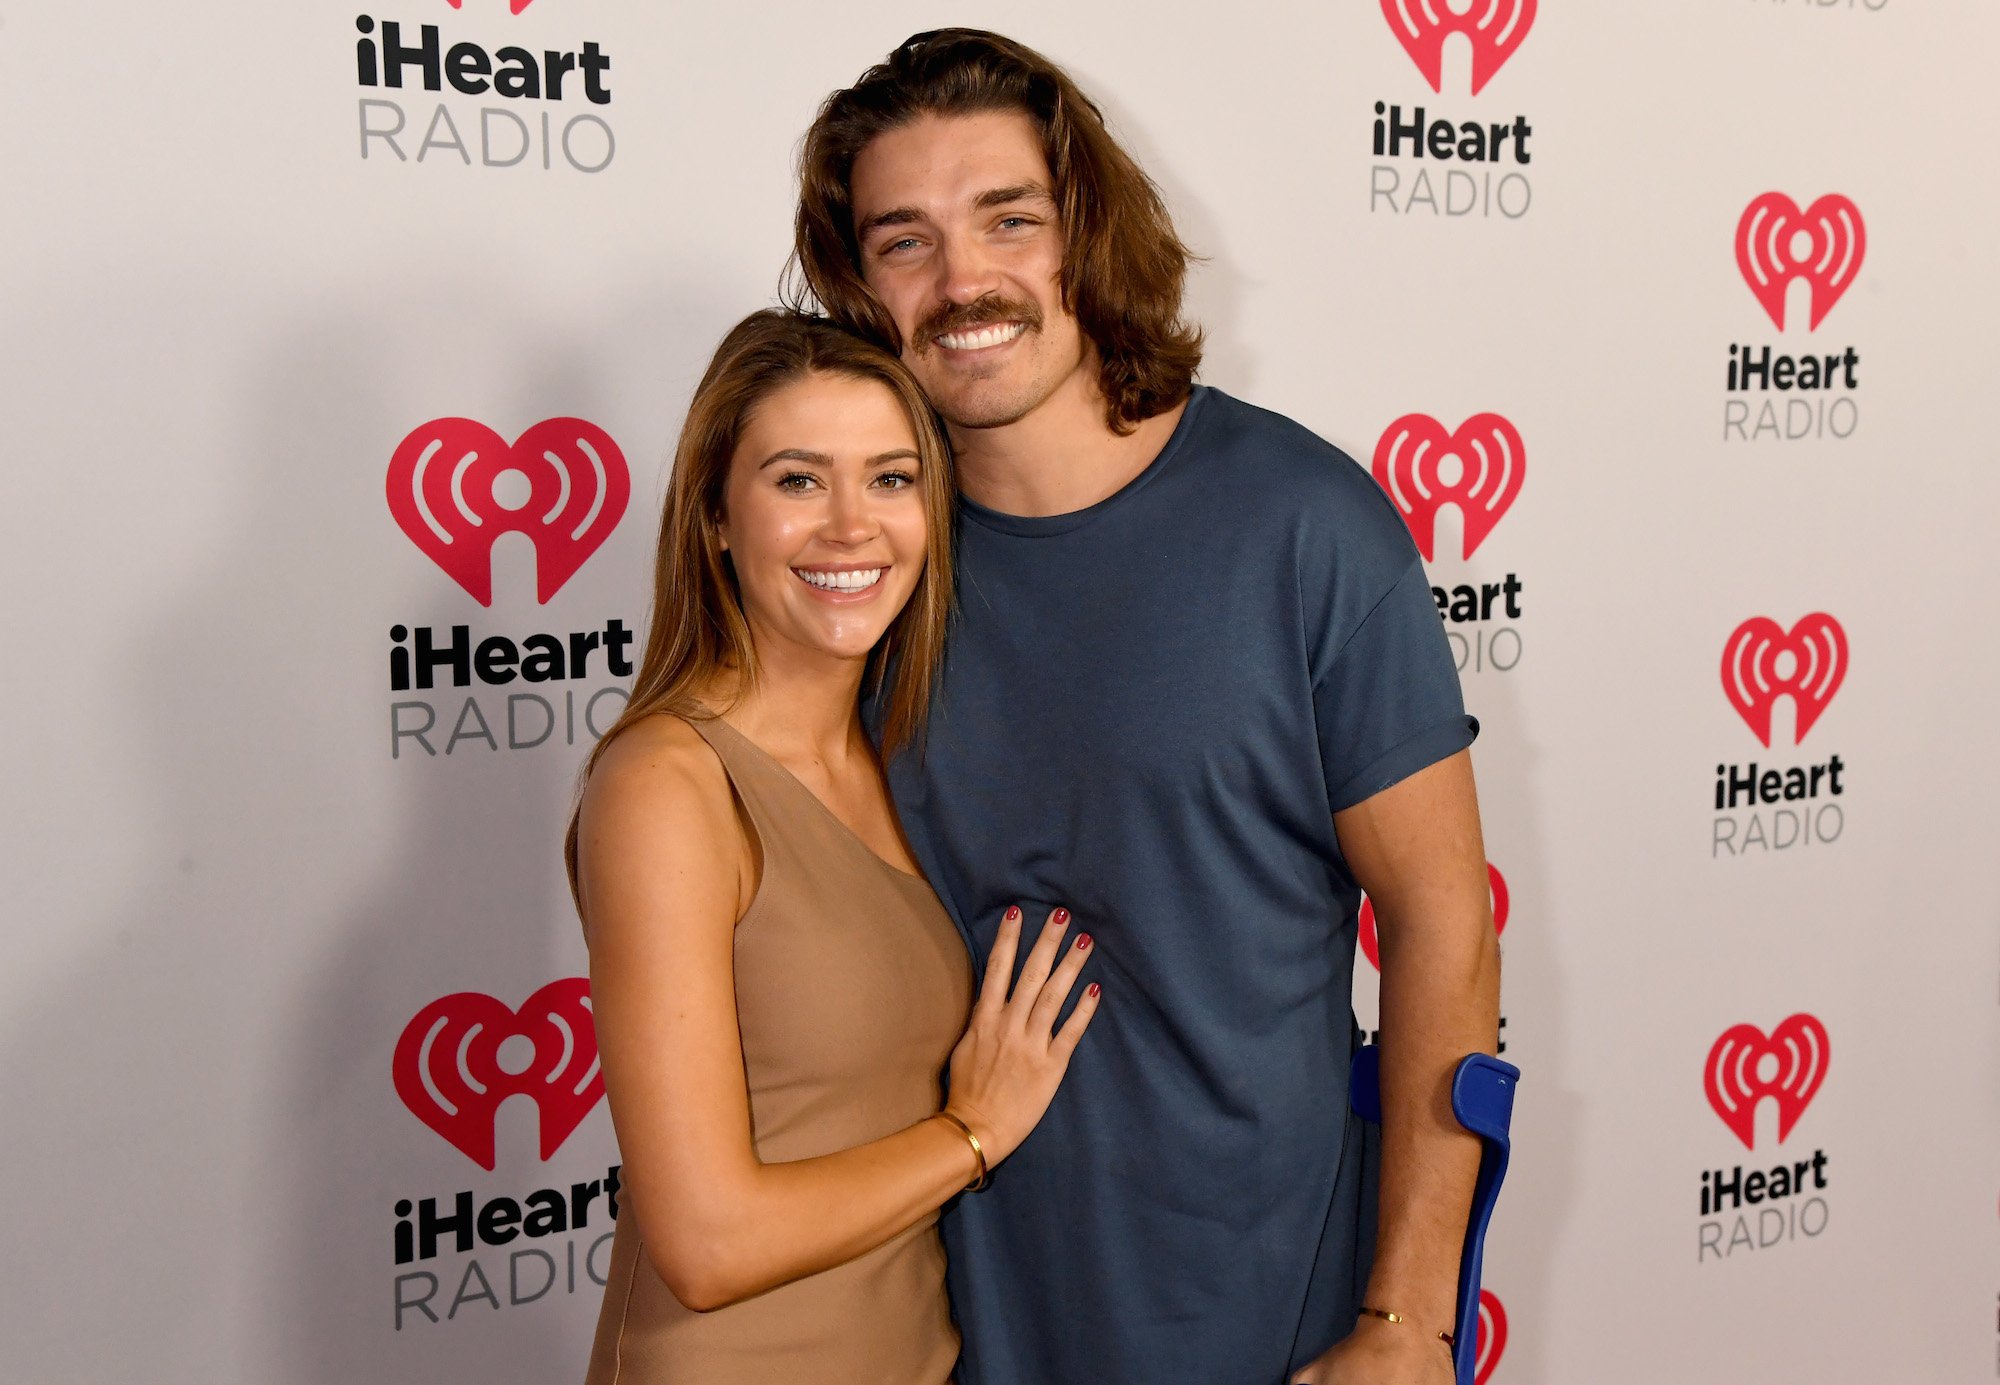 Caelynn Miller-Keyes and Dean Unglert at the 2020 iHeartRadio Podcast Awards